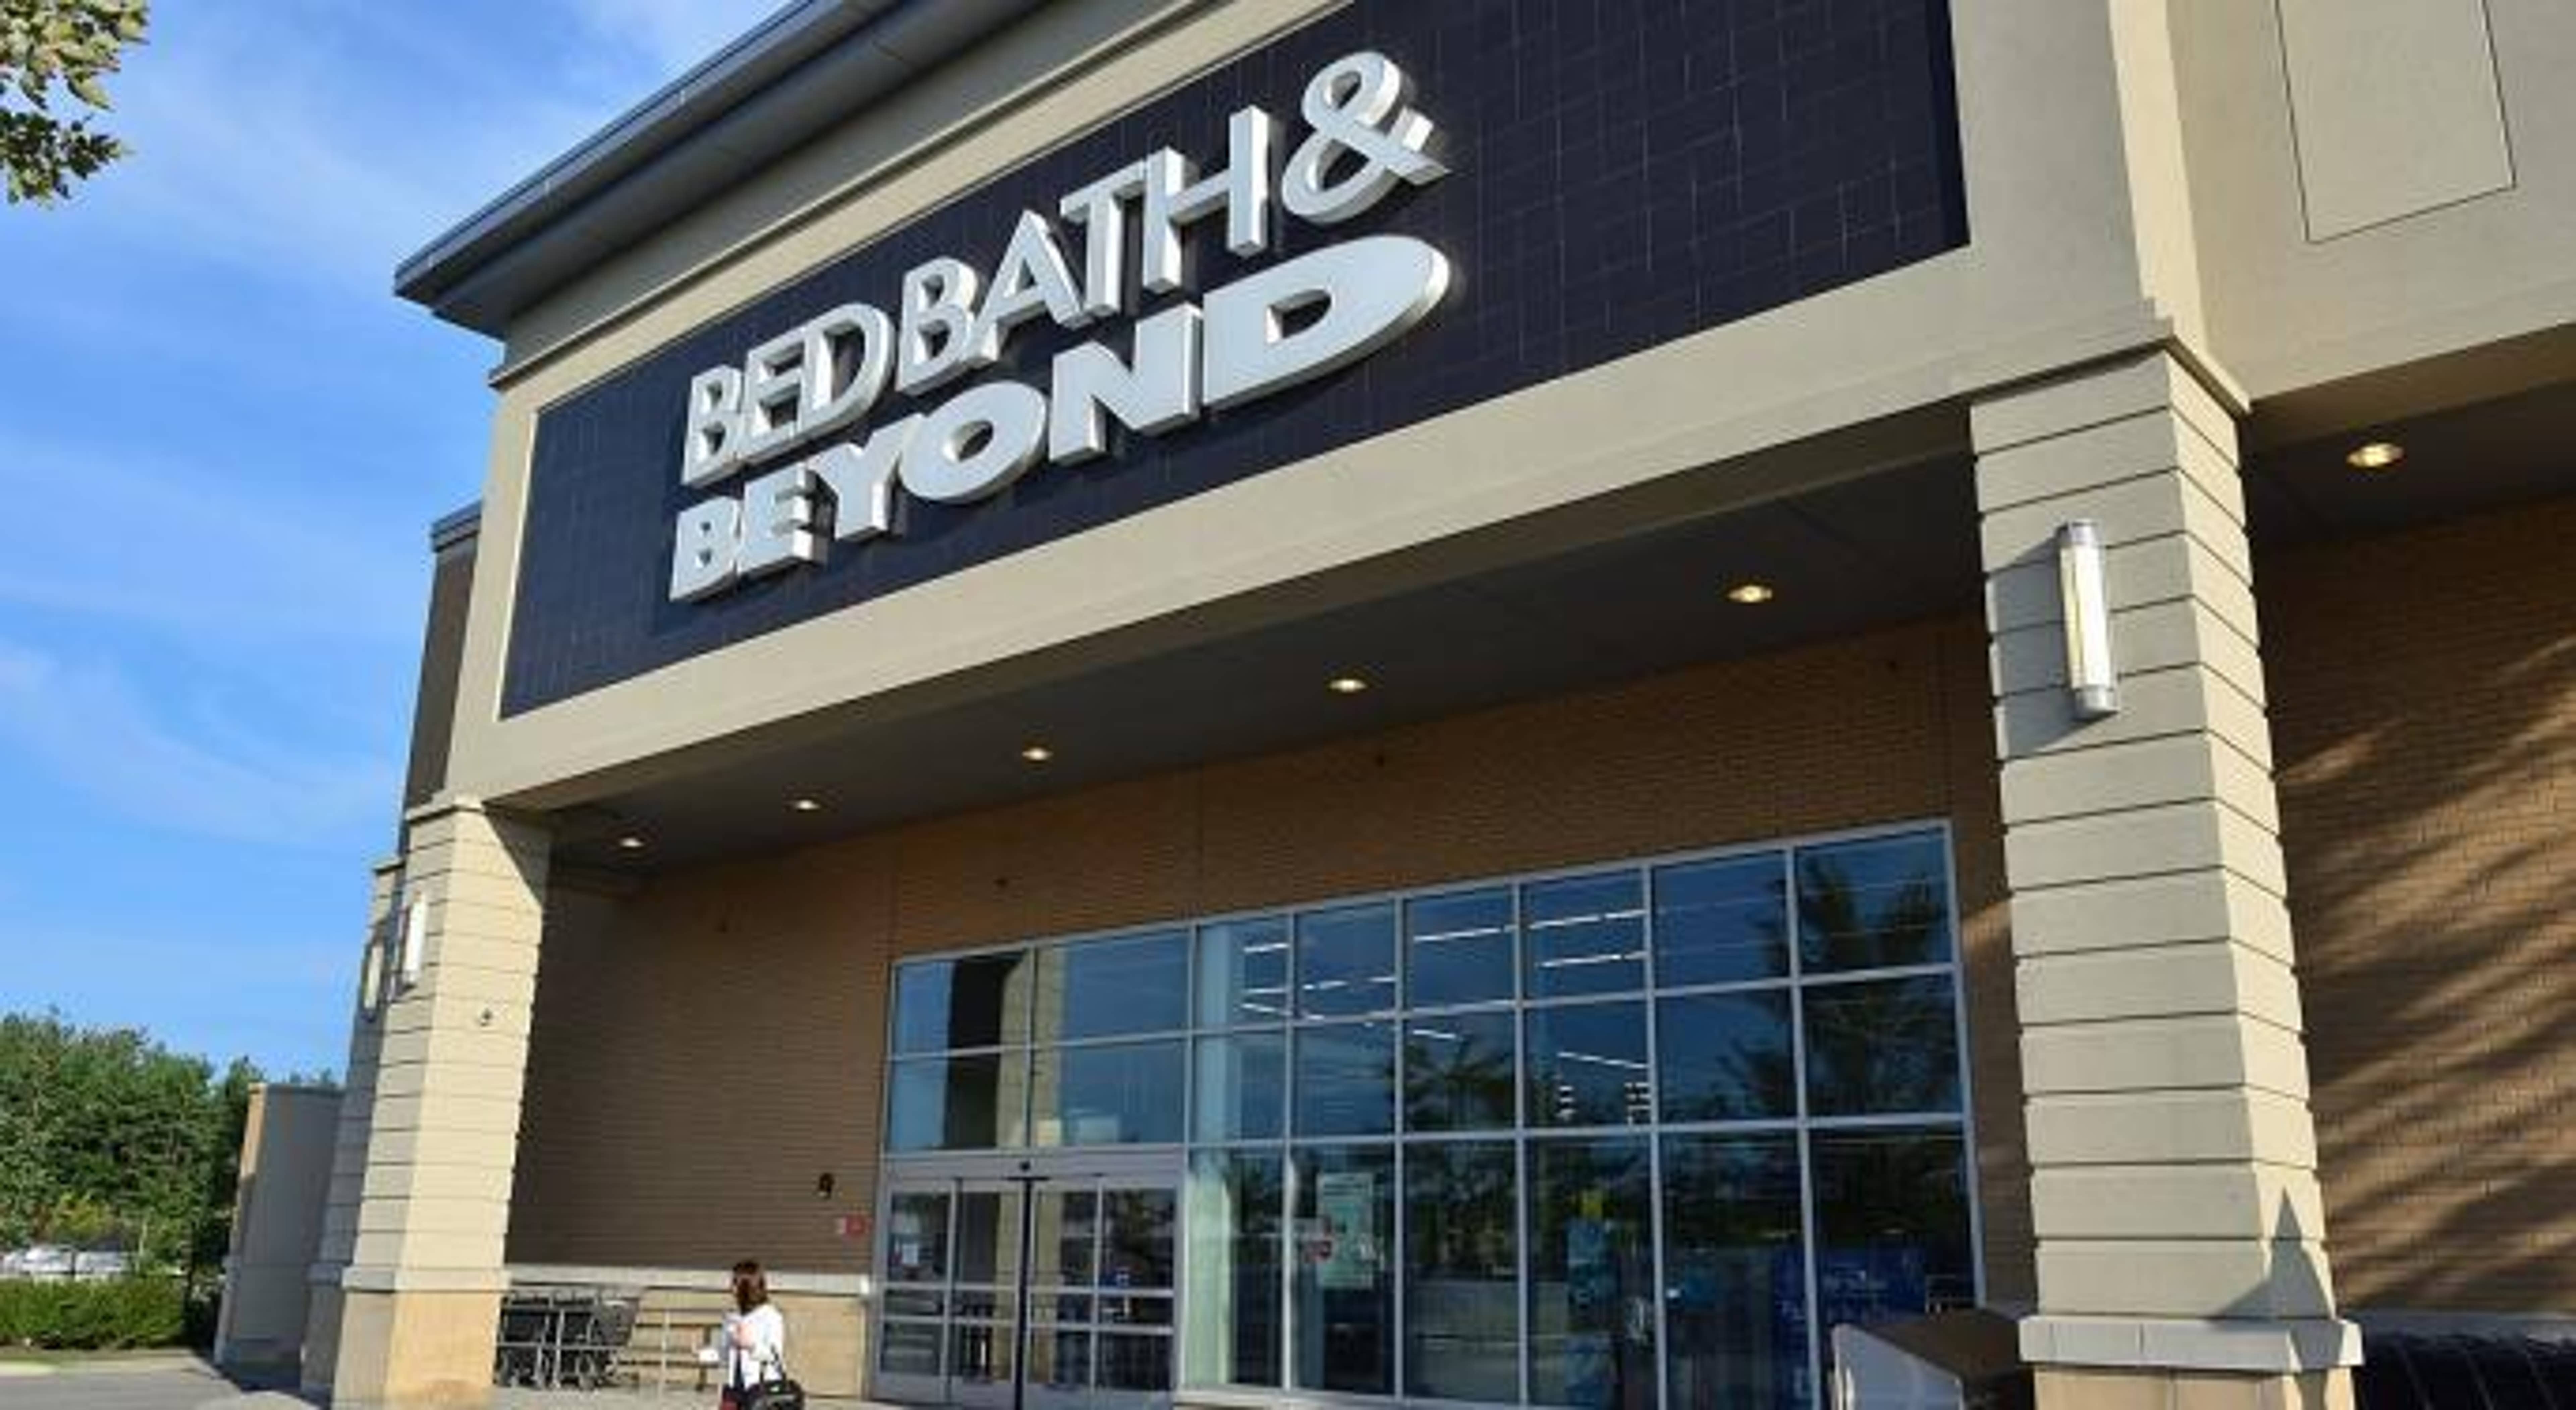 Bed, Bath &amp; Beyond Shares Rip Higher After Q1 Earnings: What Do Analysts Think?